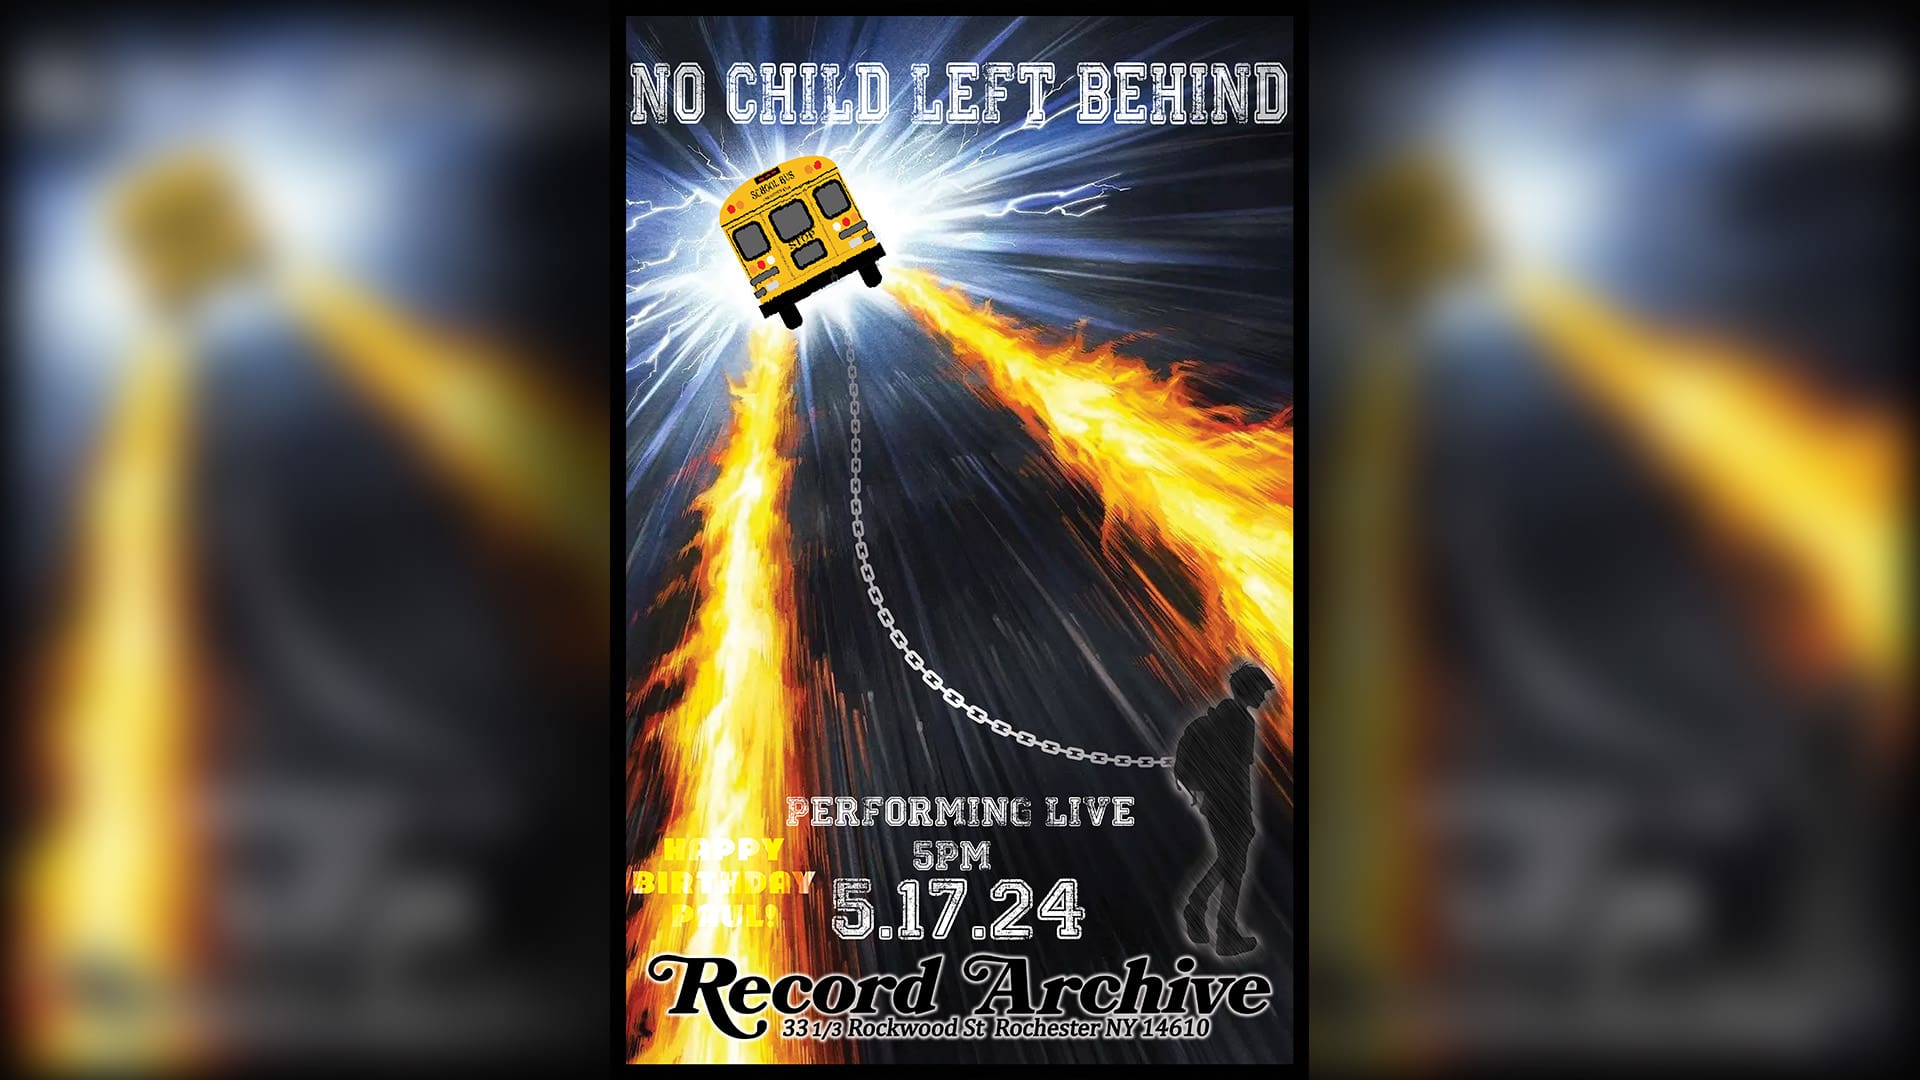 No Child Left Behind. Performing Live. 5.17.24. Happy Birthday Paul! Record Archive 33 1/3 Rockwood St Rochester NY 14610